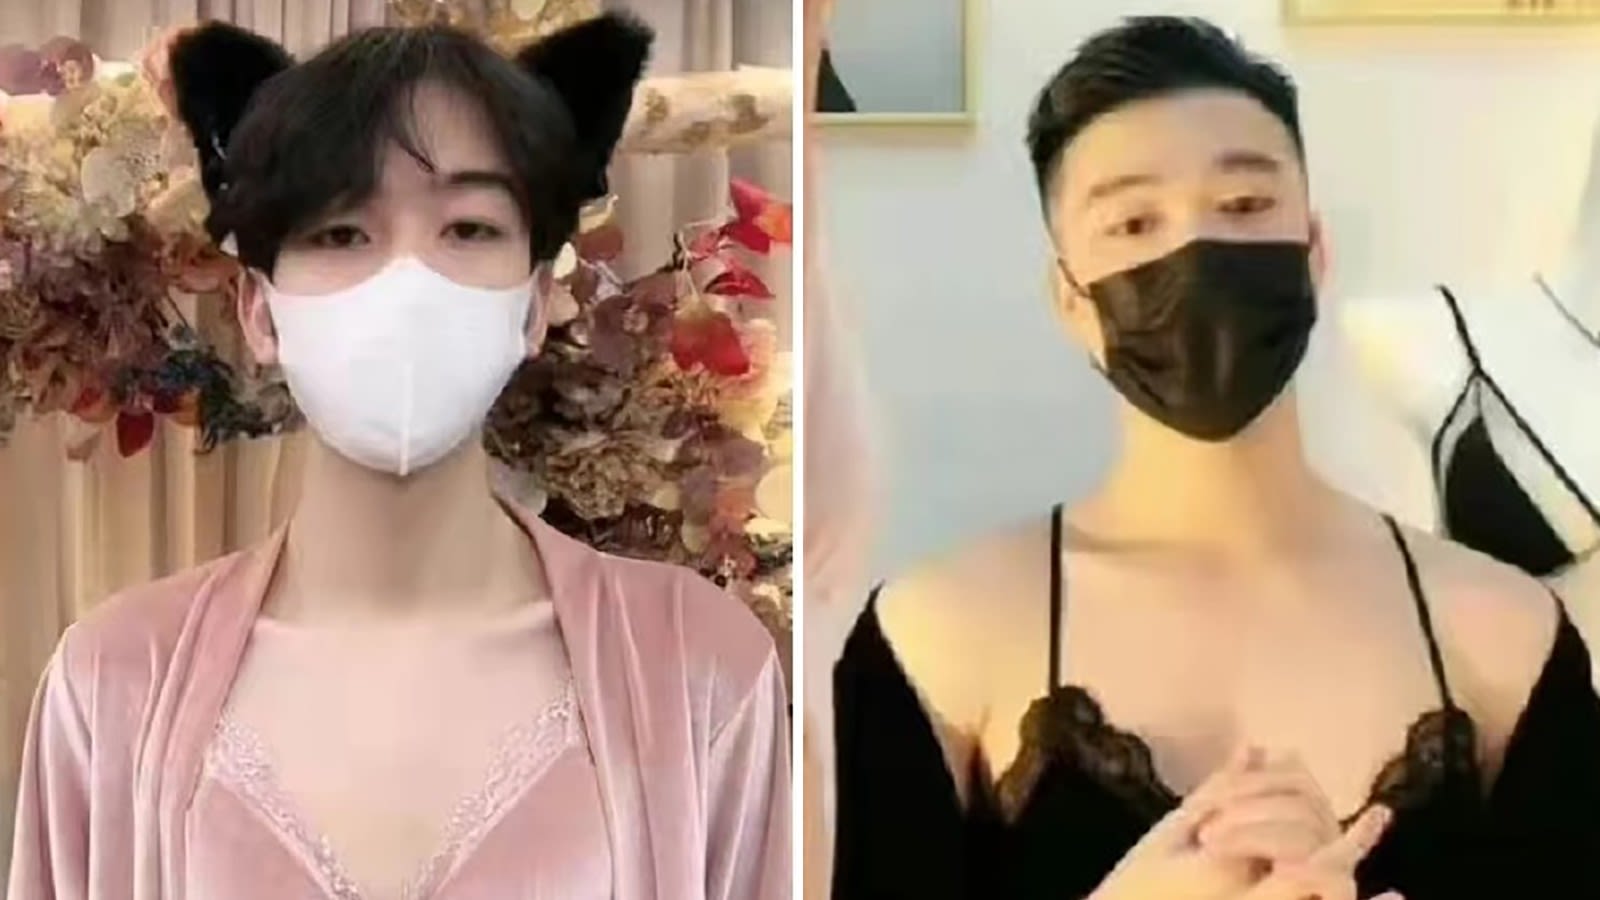 China's Lingerie Brand Taking on Beauty Standards